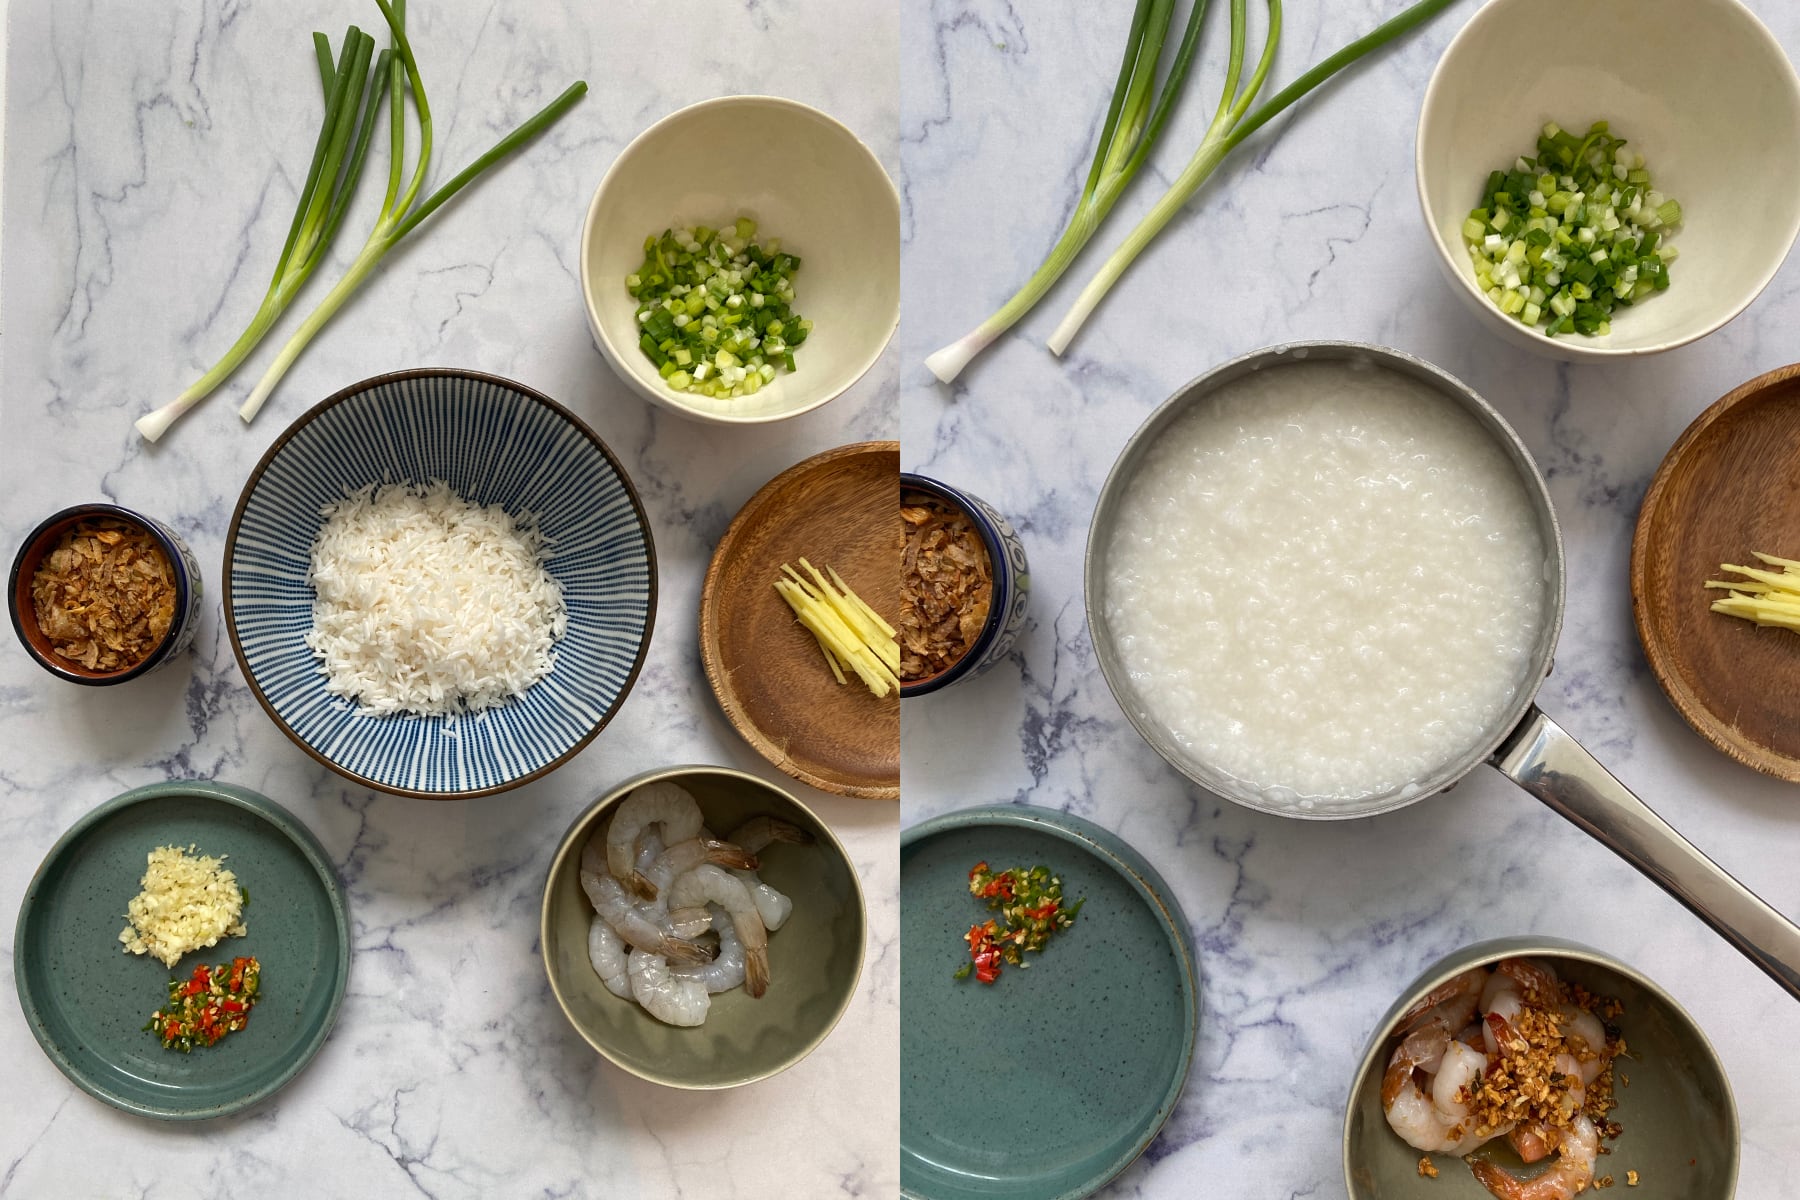 Congee ingredients and cooked congee